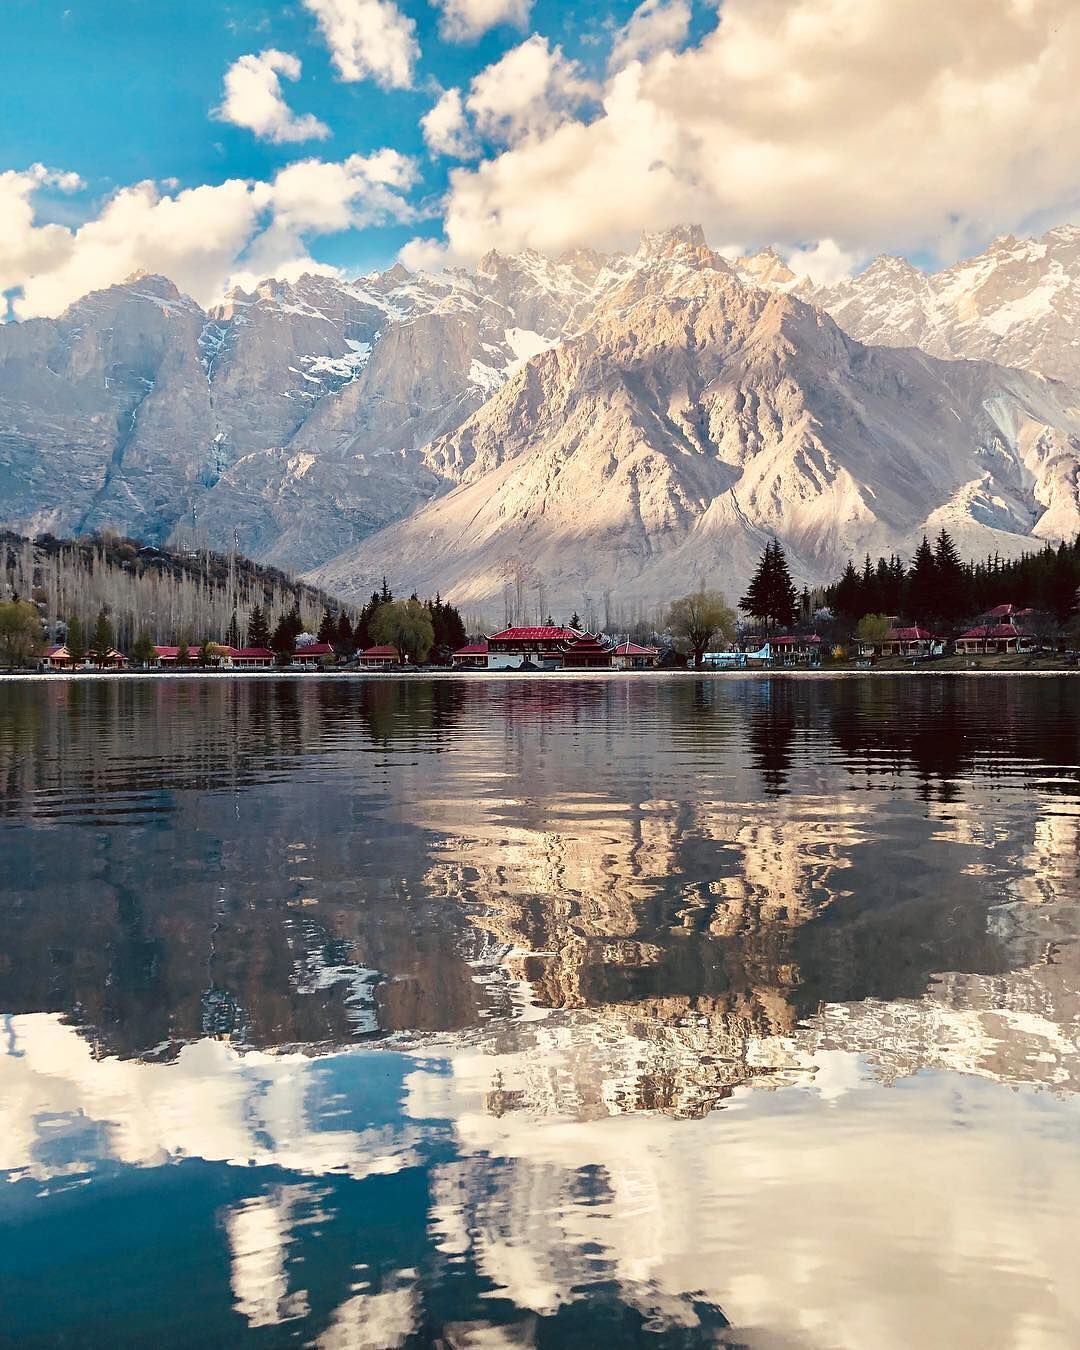 Shangrila Resort in Skardu with an astounding view of the lake, surrounded by the fruits laden o. Shangrila resort, Picture of beautiful places, Beautiful places